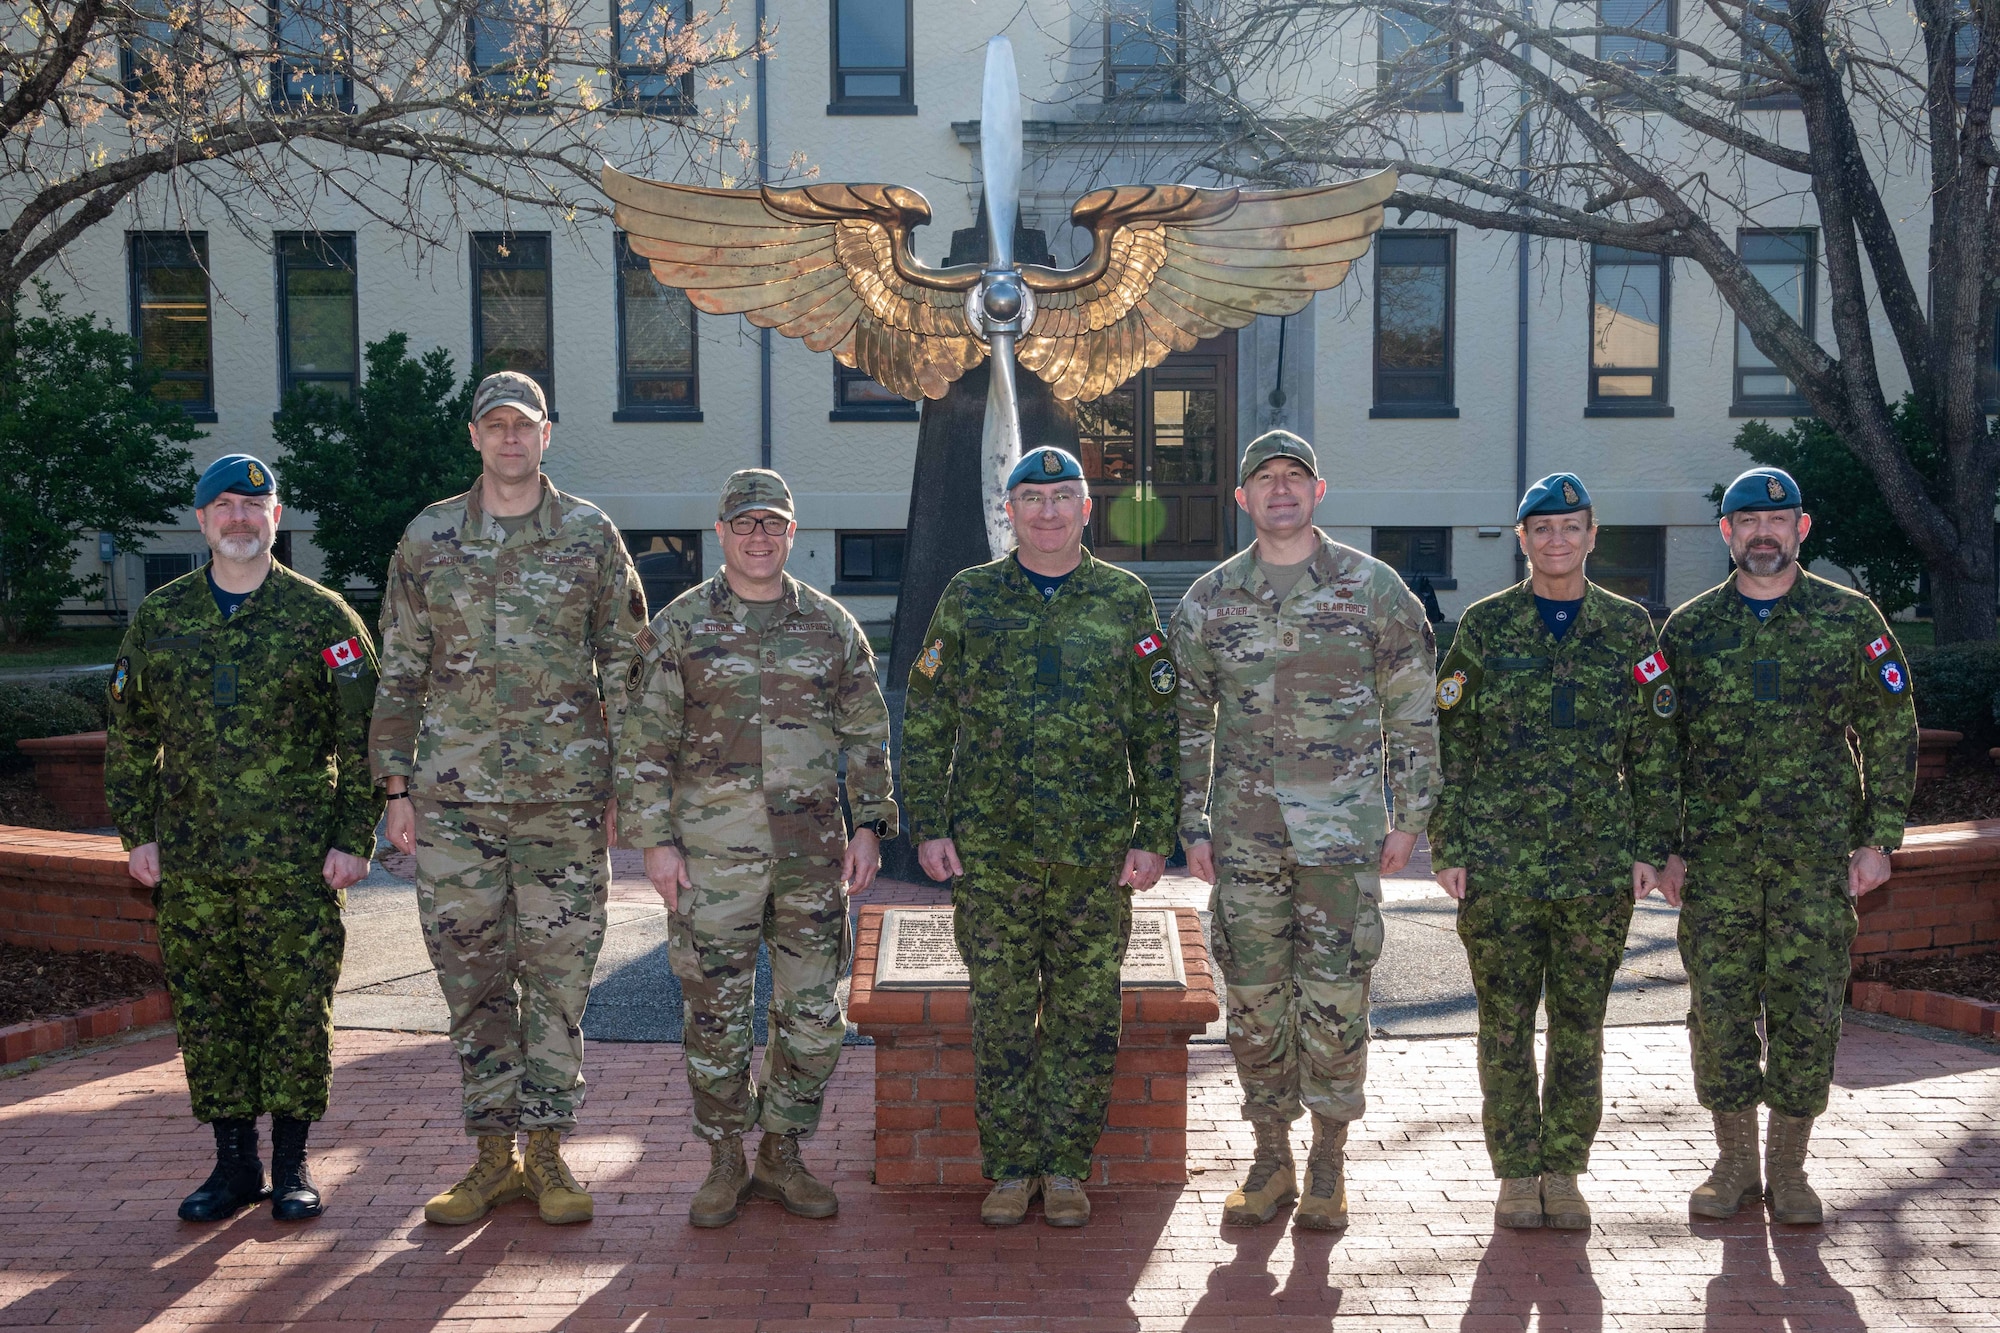 Royal Canadian Air Force Command Chief Warrant Officer John Hall (center) and RCAF representatives pose with Air University senior enlisted leaders at Maxwell Air Force Base, March 30, 2023. From left: Chief Warrant Officer Robert Peldjak, Chief Master Sgt. Richard Vaden, Chief Master Sgt. Mikael Sundin, CCWO Hall, and AU Command Chief Master Sgt. Stefan Blazier. (US Air Force photo by Melanie Rodgers Cox)